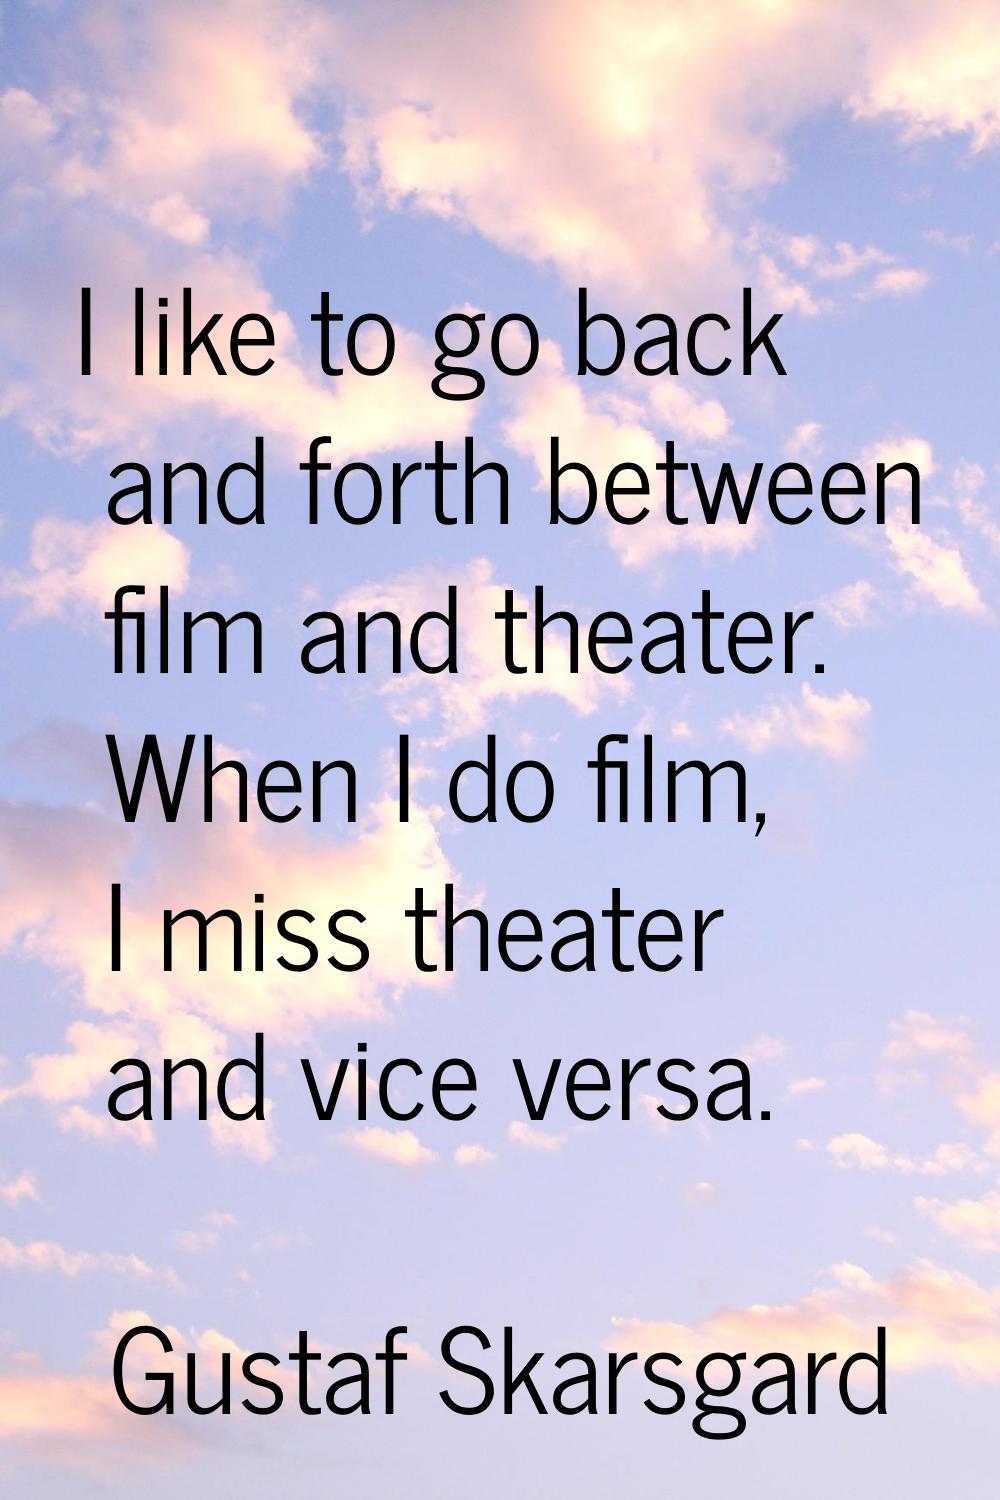 I like to go back and forth between film and theater. When I do film, I miss theater and vice versa